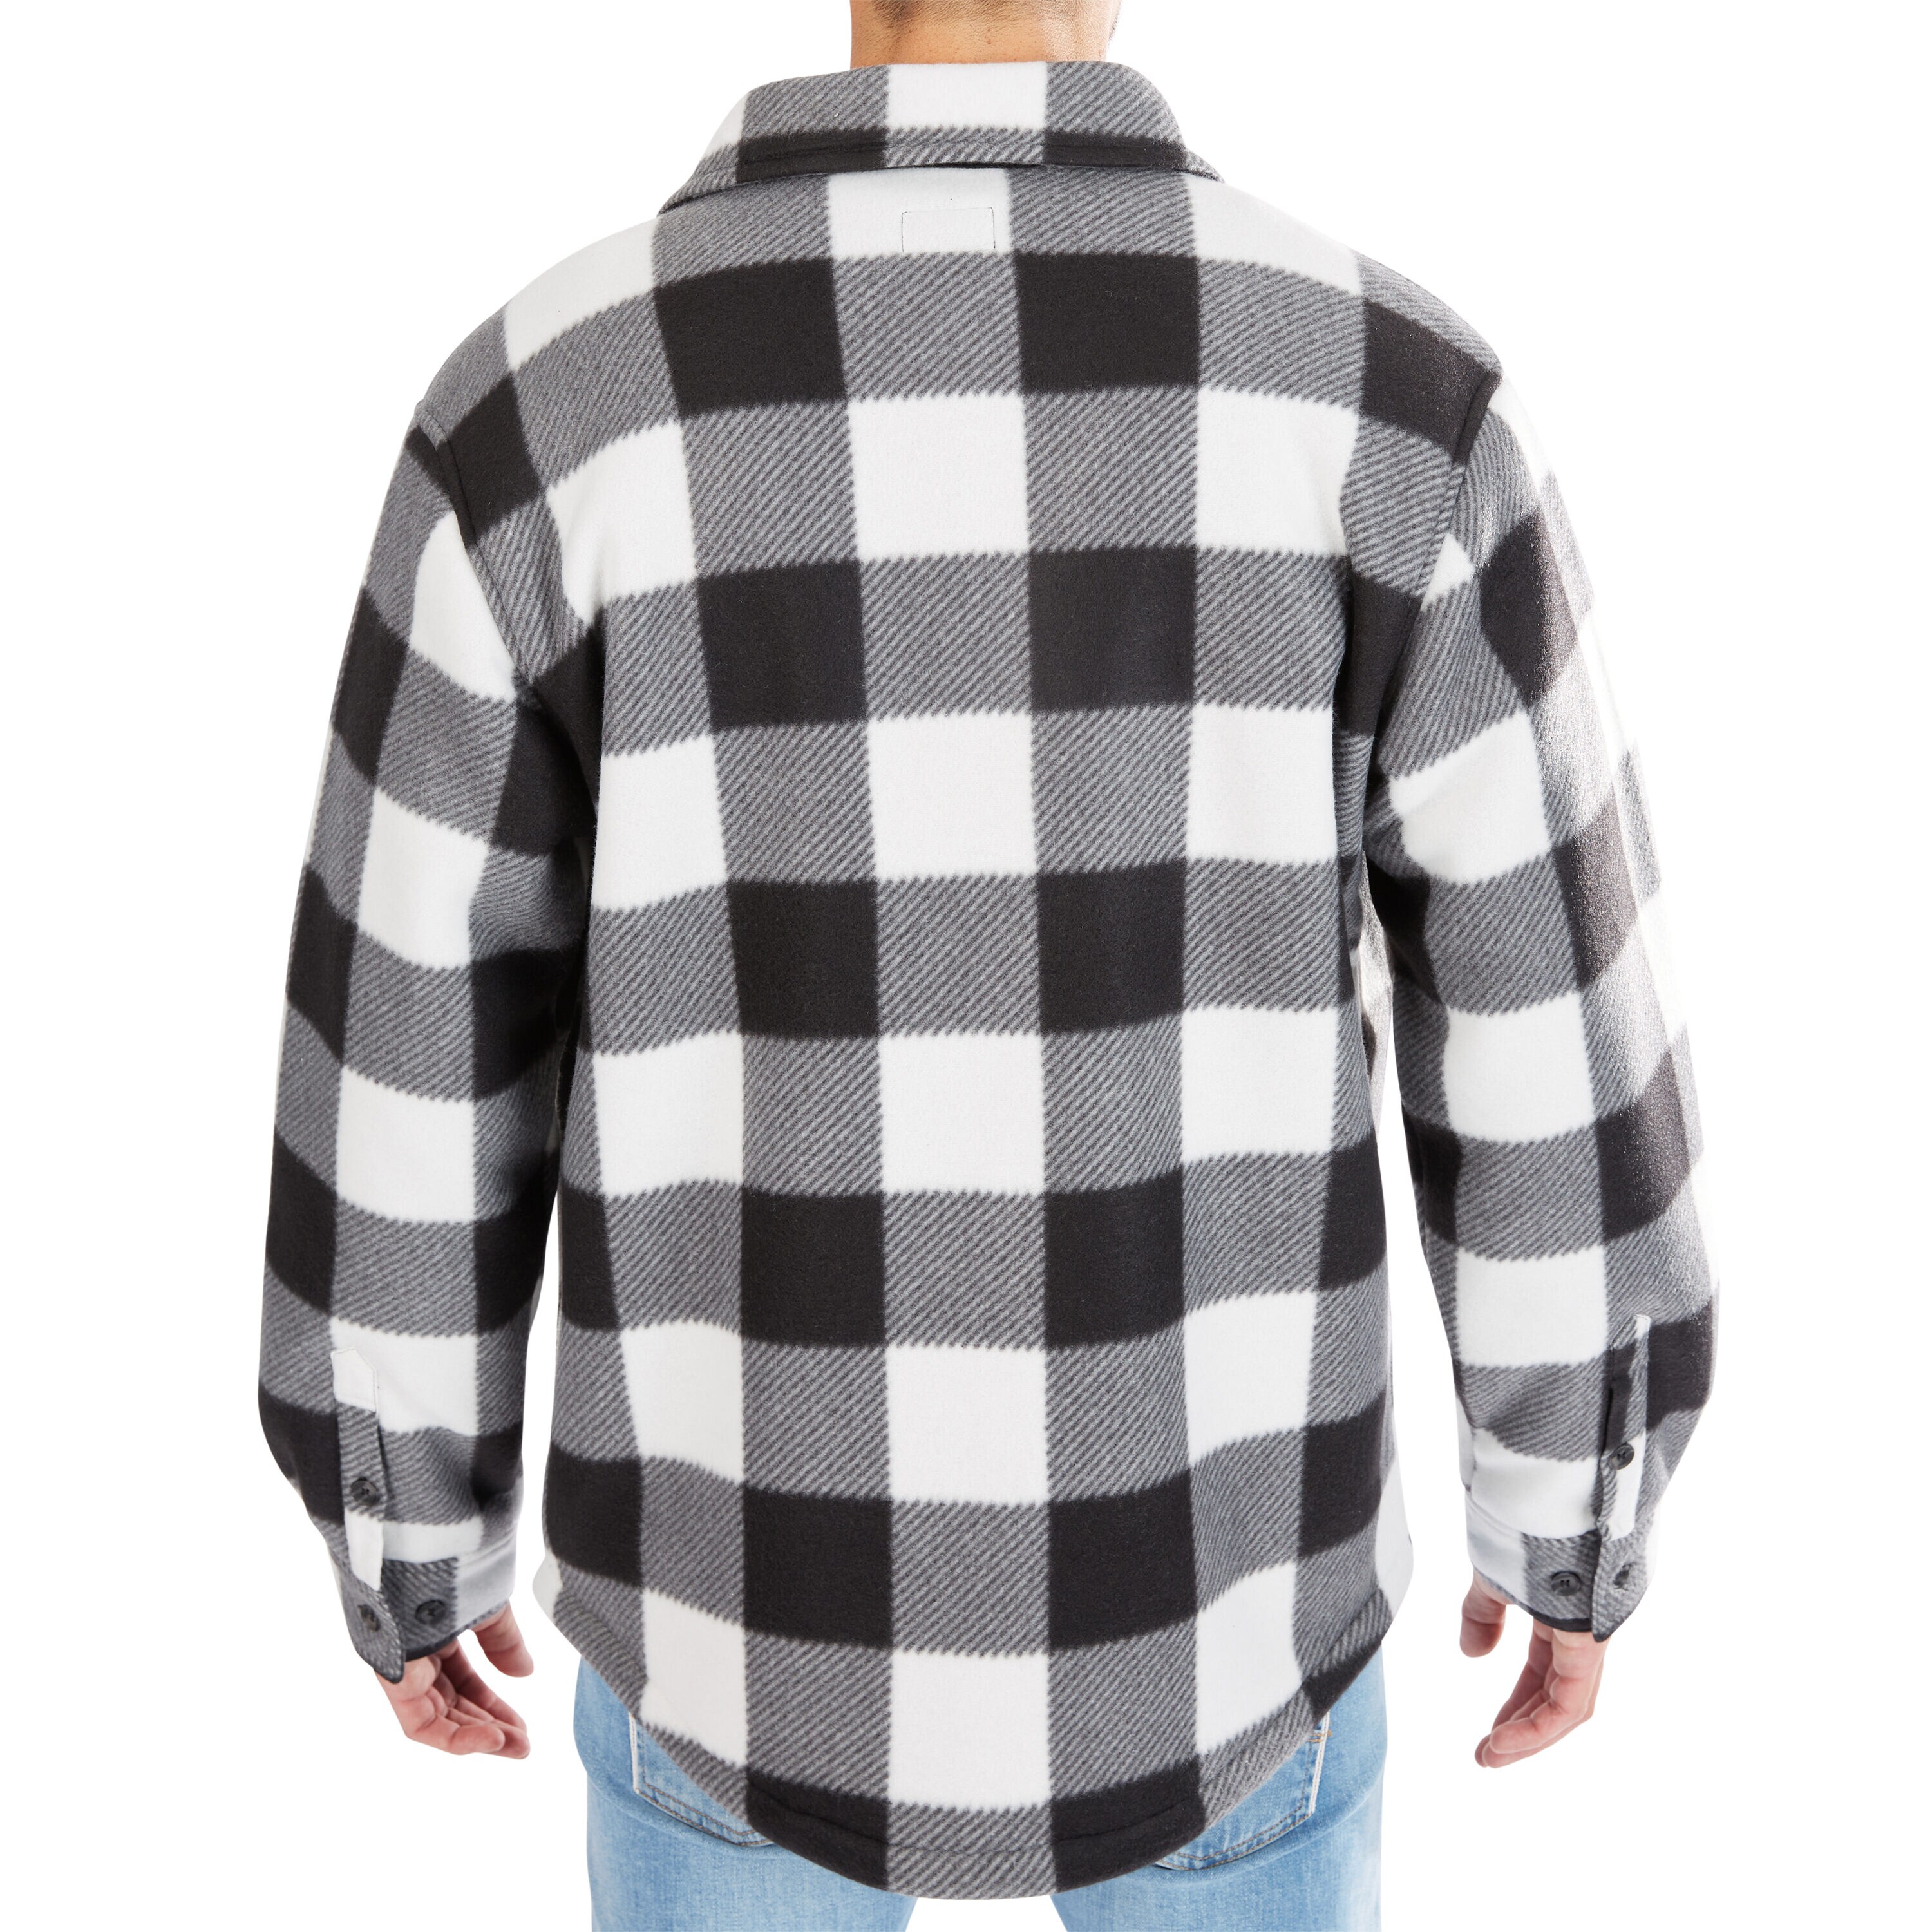 Smith's Workwear Sherpa-Lined Plaid Fleece Shirt Jacket in the